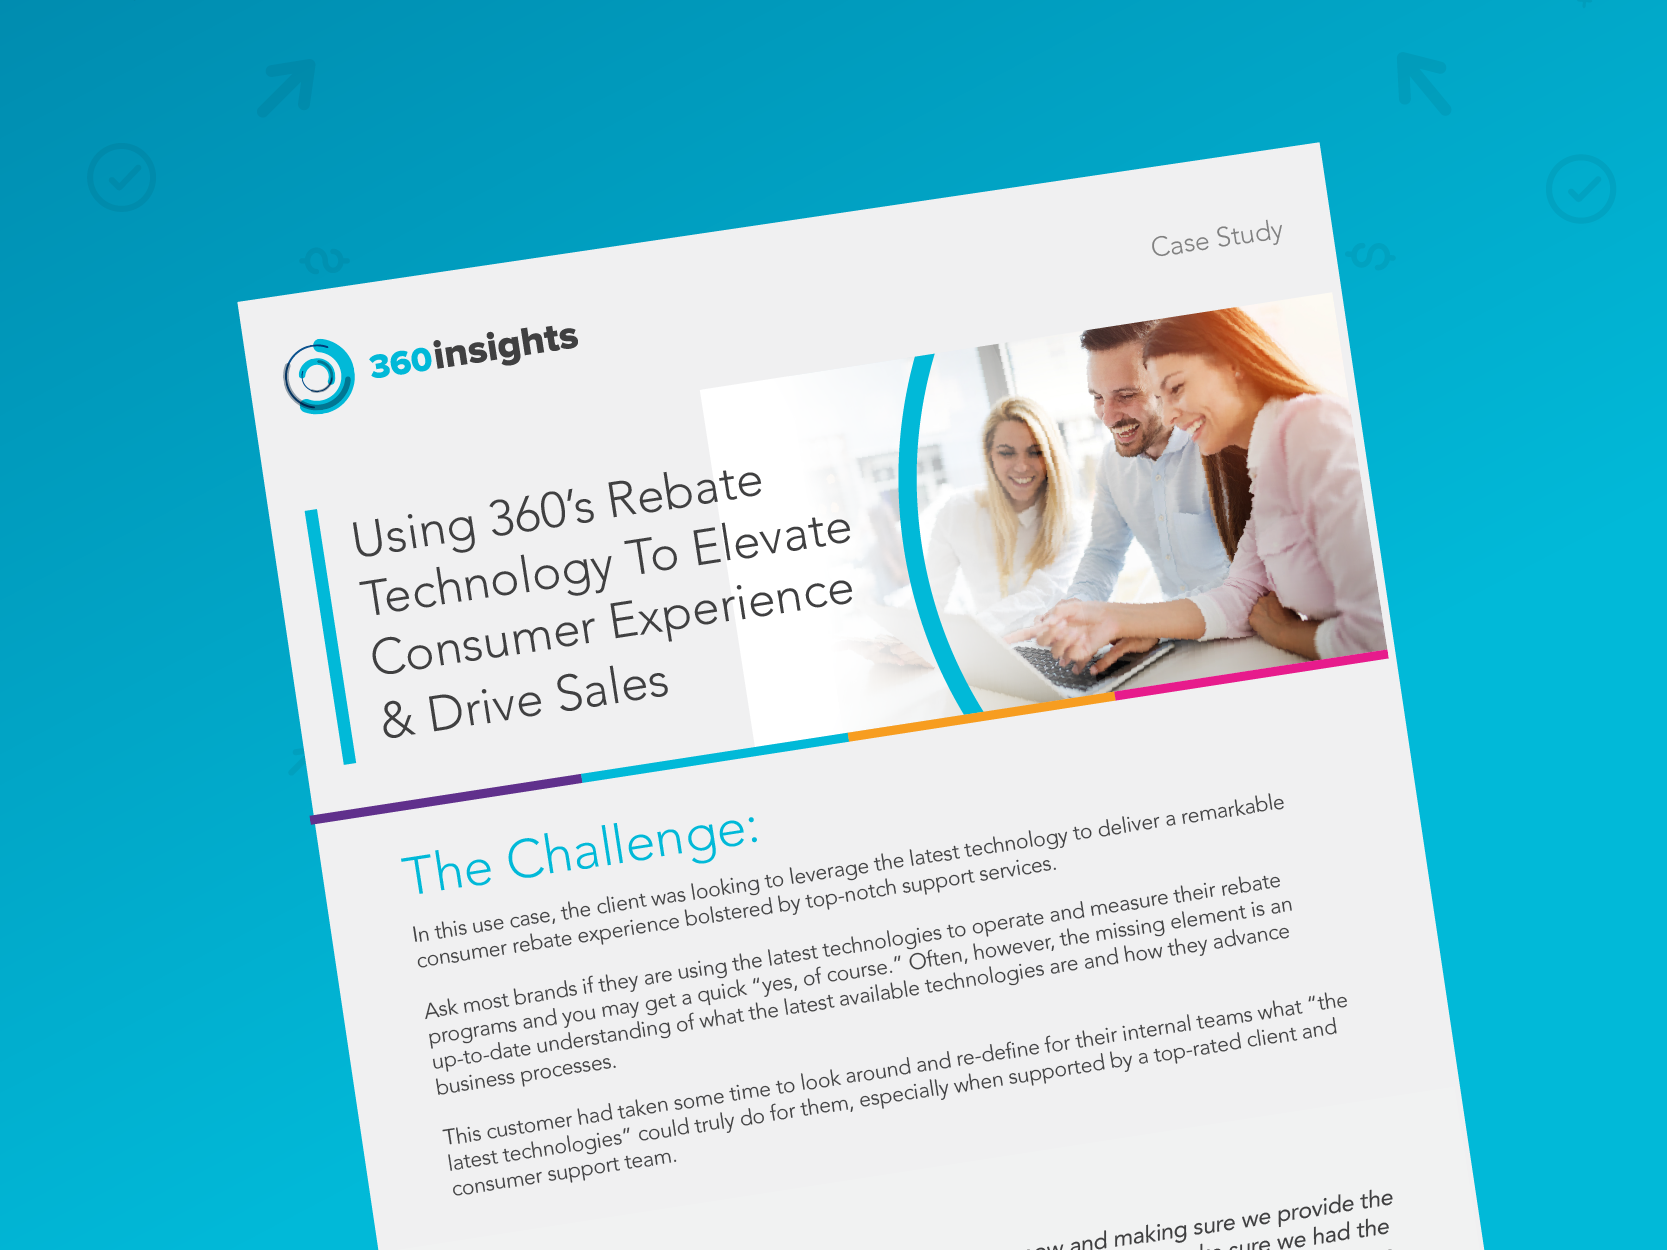 Case study about a company in the appliance industry using 360s rebate technology to elevate the consumer experience